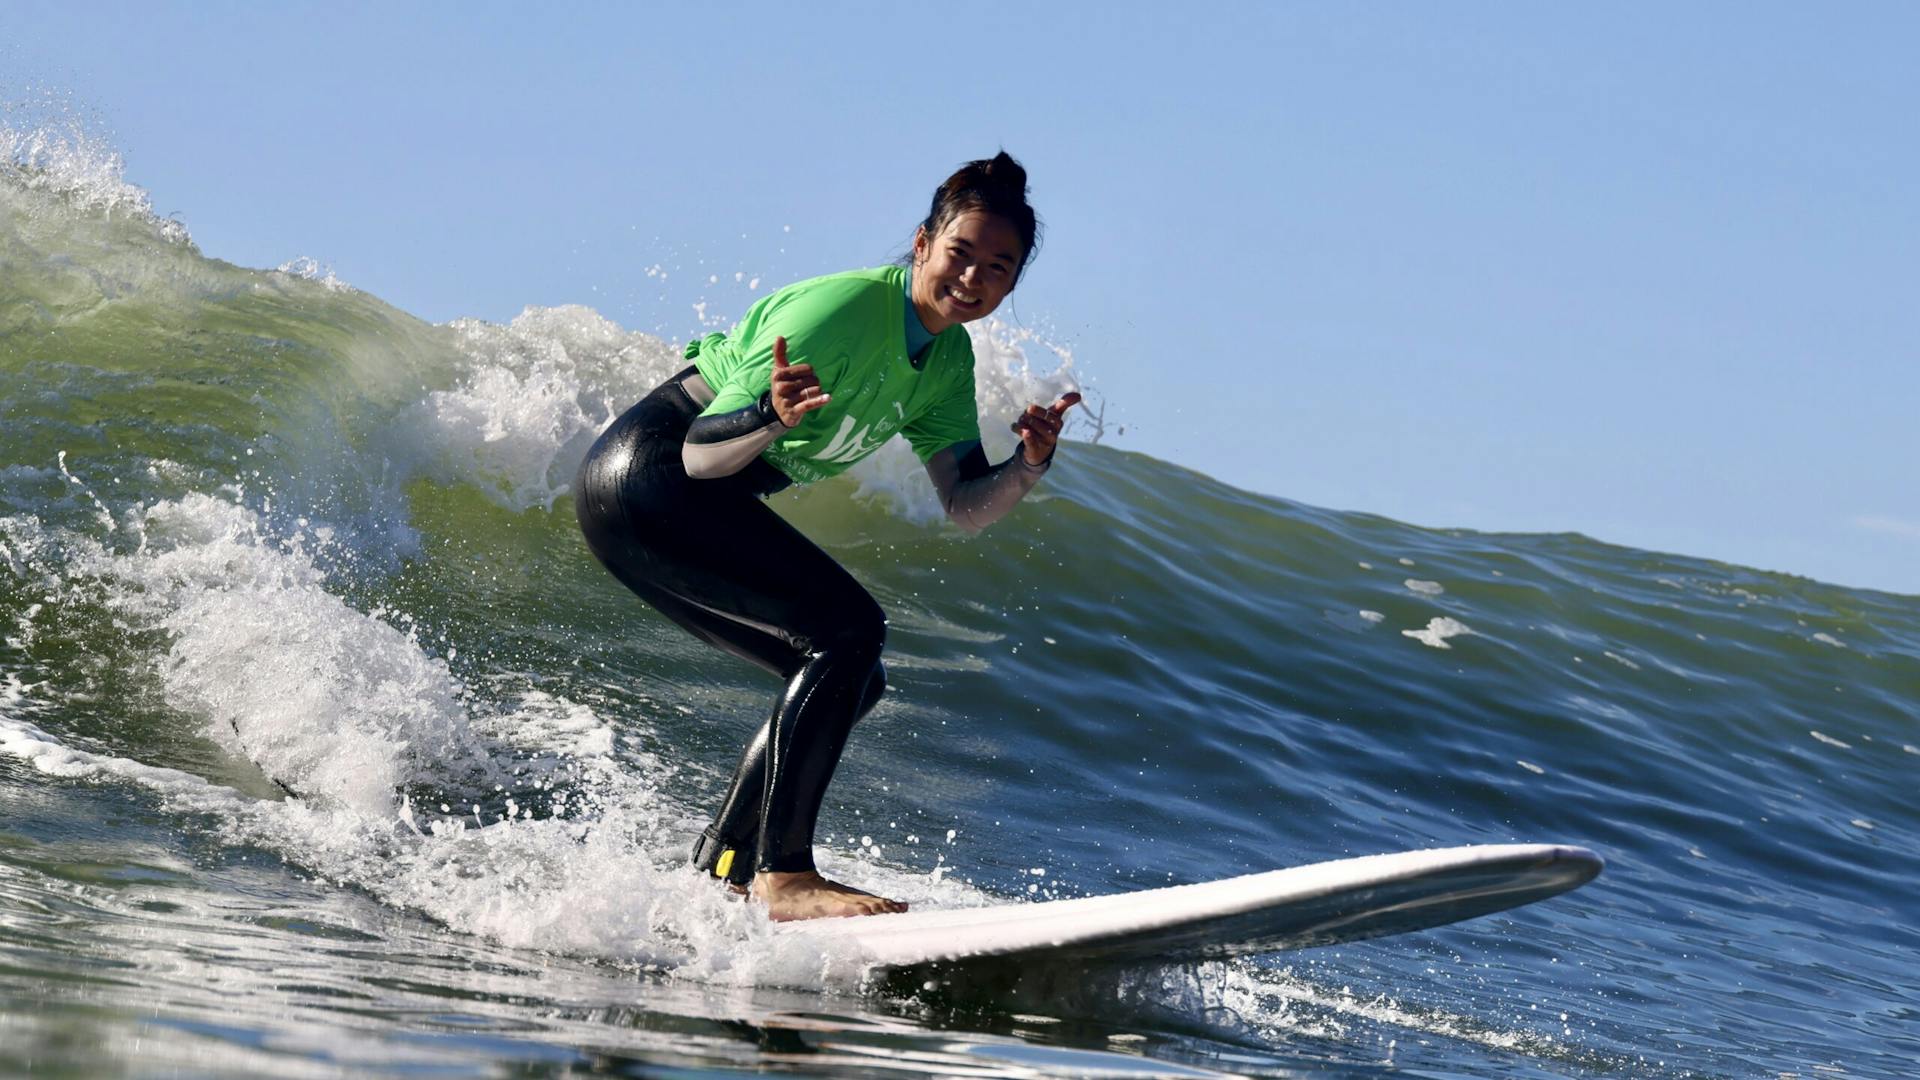 A female surfer rides a wave while display the shaka sign on both hands